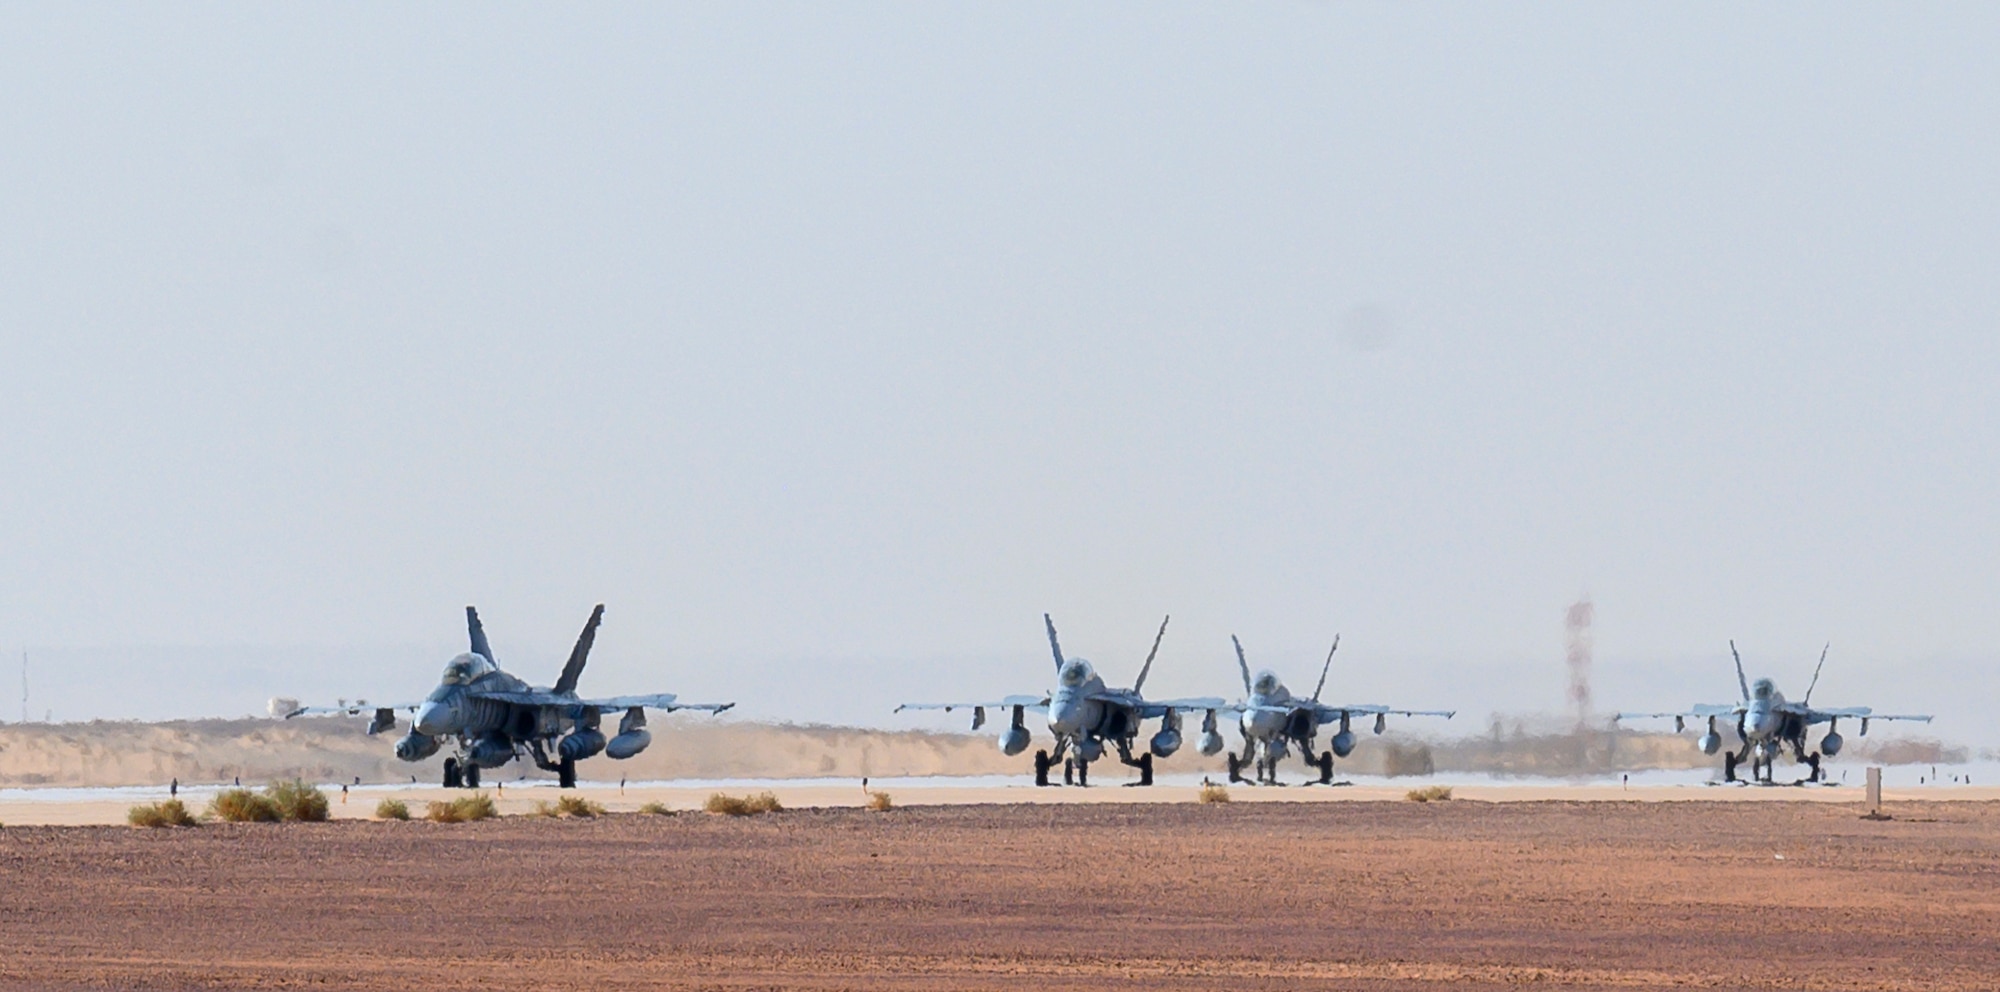 U.S. Marine Corps F/A-18D Hornets taxi across the flightline at Prince Sultan Air Base, Kingdom of Saudi Arabia, May 8, 2021. A detachment of F/A-18s, along with squadron personnel from Marine Corps Air Station Beaufort, South Carolina, will rapidly integrate into theater training, as well as joint and partnered missions, as part of a dynamic force employment highlighting the U.S. military’s ability to rapidly deploy and employ forces anywhere around the globe. (U.S. Air Force photo by Senior Airman Samuel Earick)